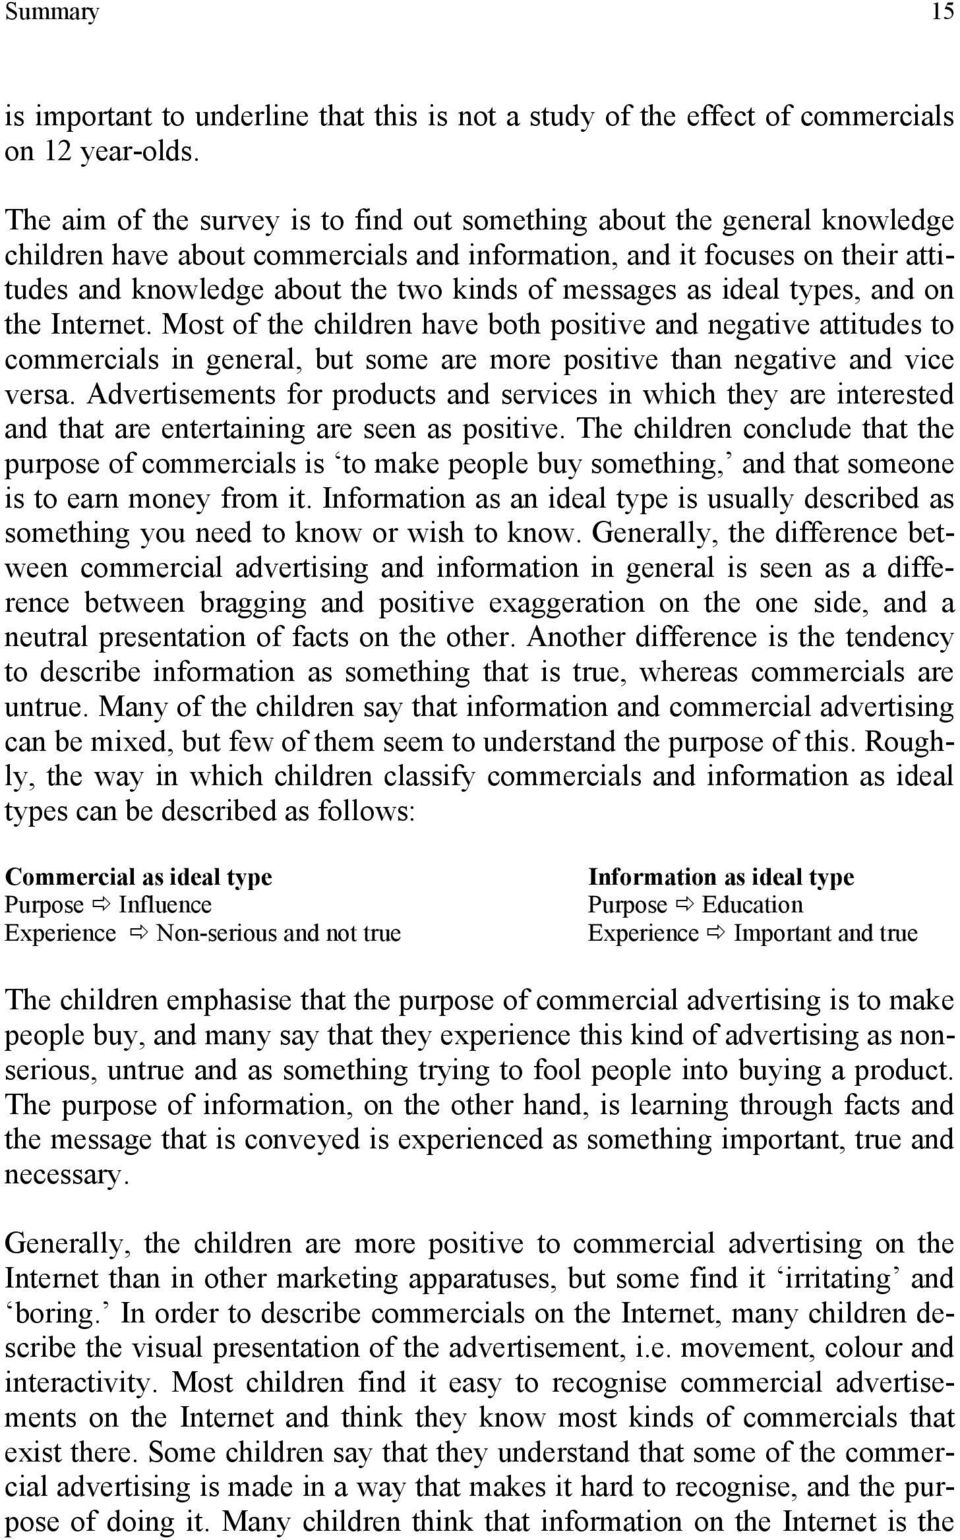 messages as ideal types, and on the Internet. Most of the children have both positive and negative attitudes to commercials in general, but some are more positive than negative and vice versa.